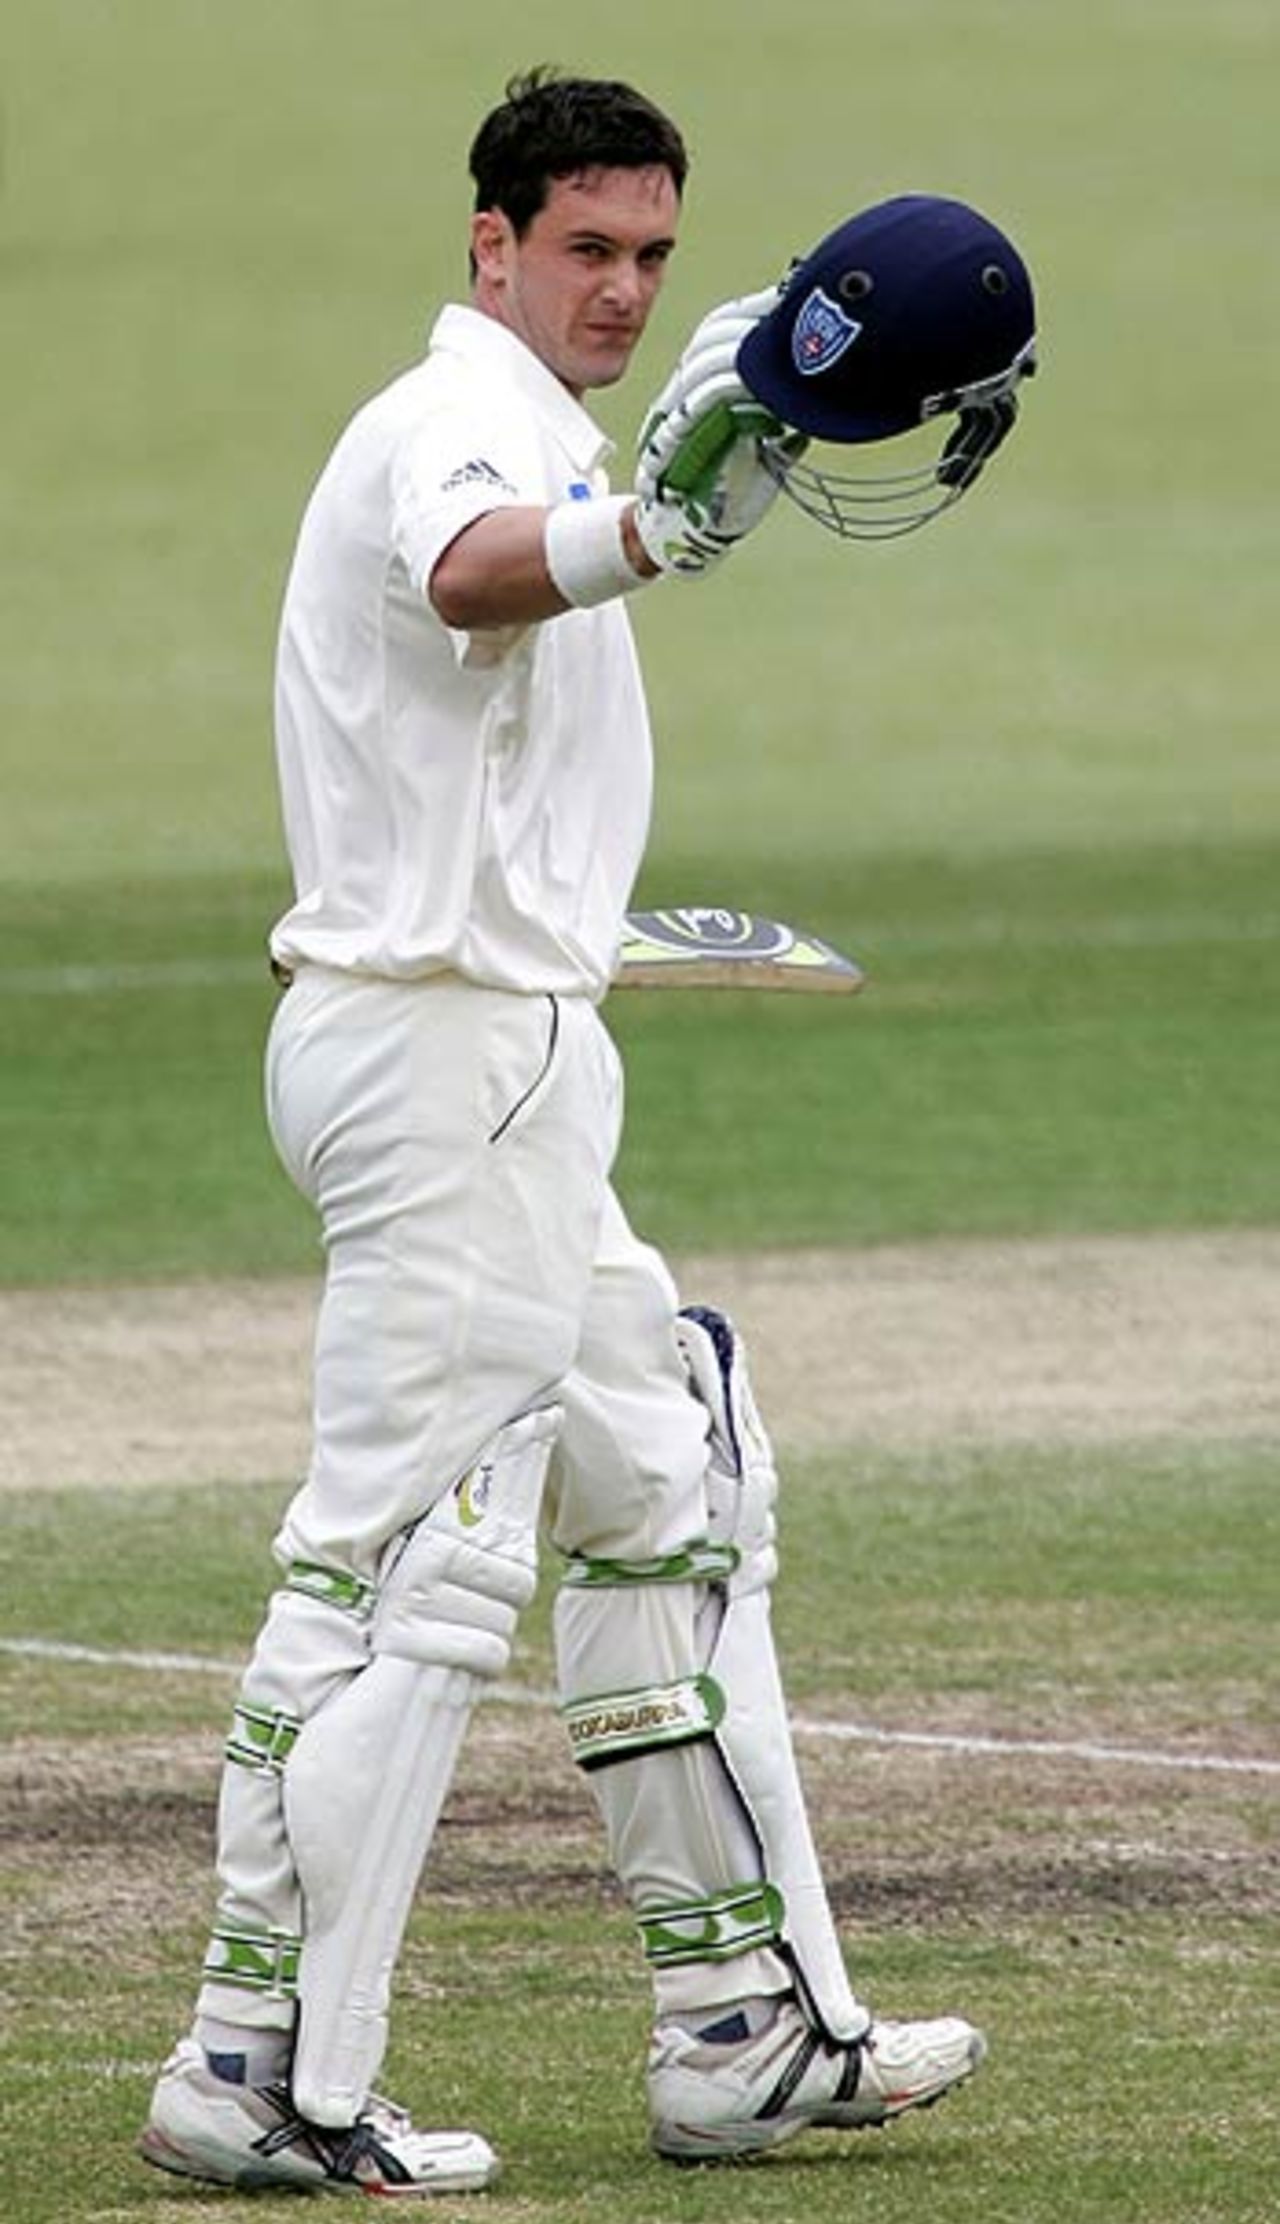 Aaron O'Brien acknowledges the crowd after his hundred against Western Australia, Western Australia v New South Wales, Pura Cup, Perth, November 7, 2005